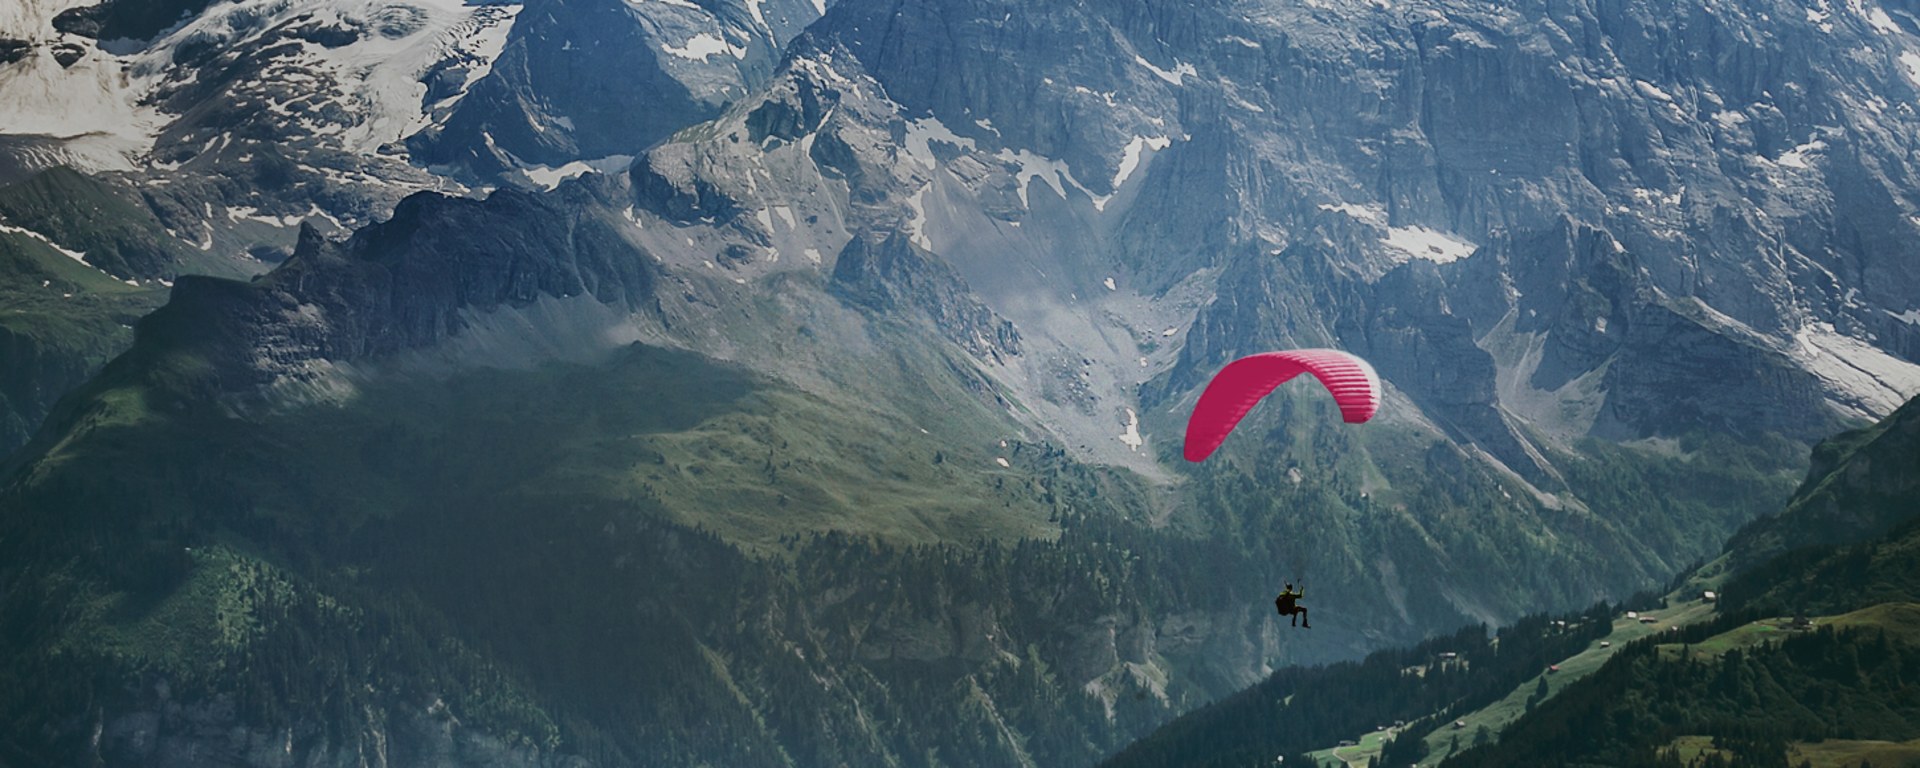 A paraglider is flying through the Swiss mountain landscape.